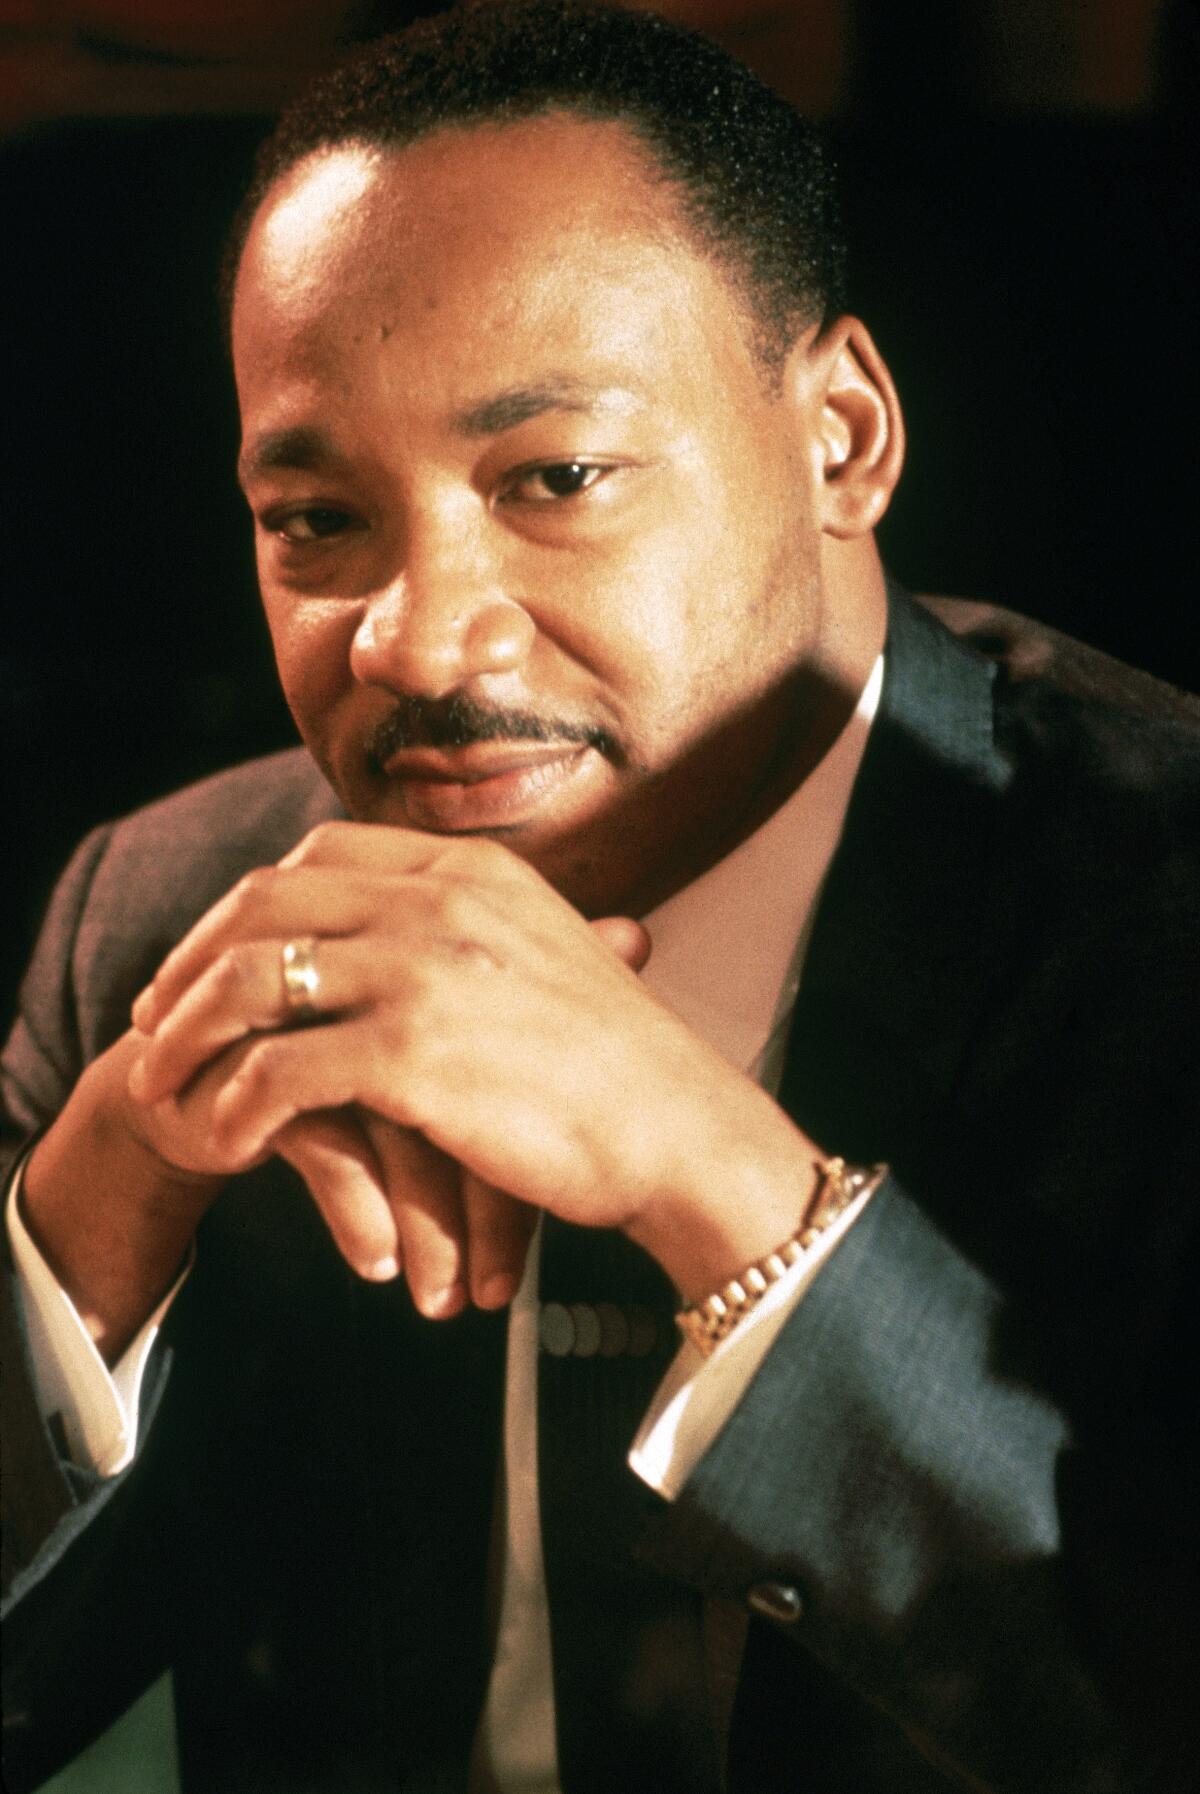 Martin Luther King Jr. poses for a portrait circa 1967.